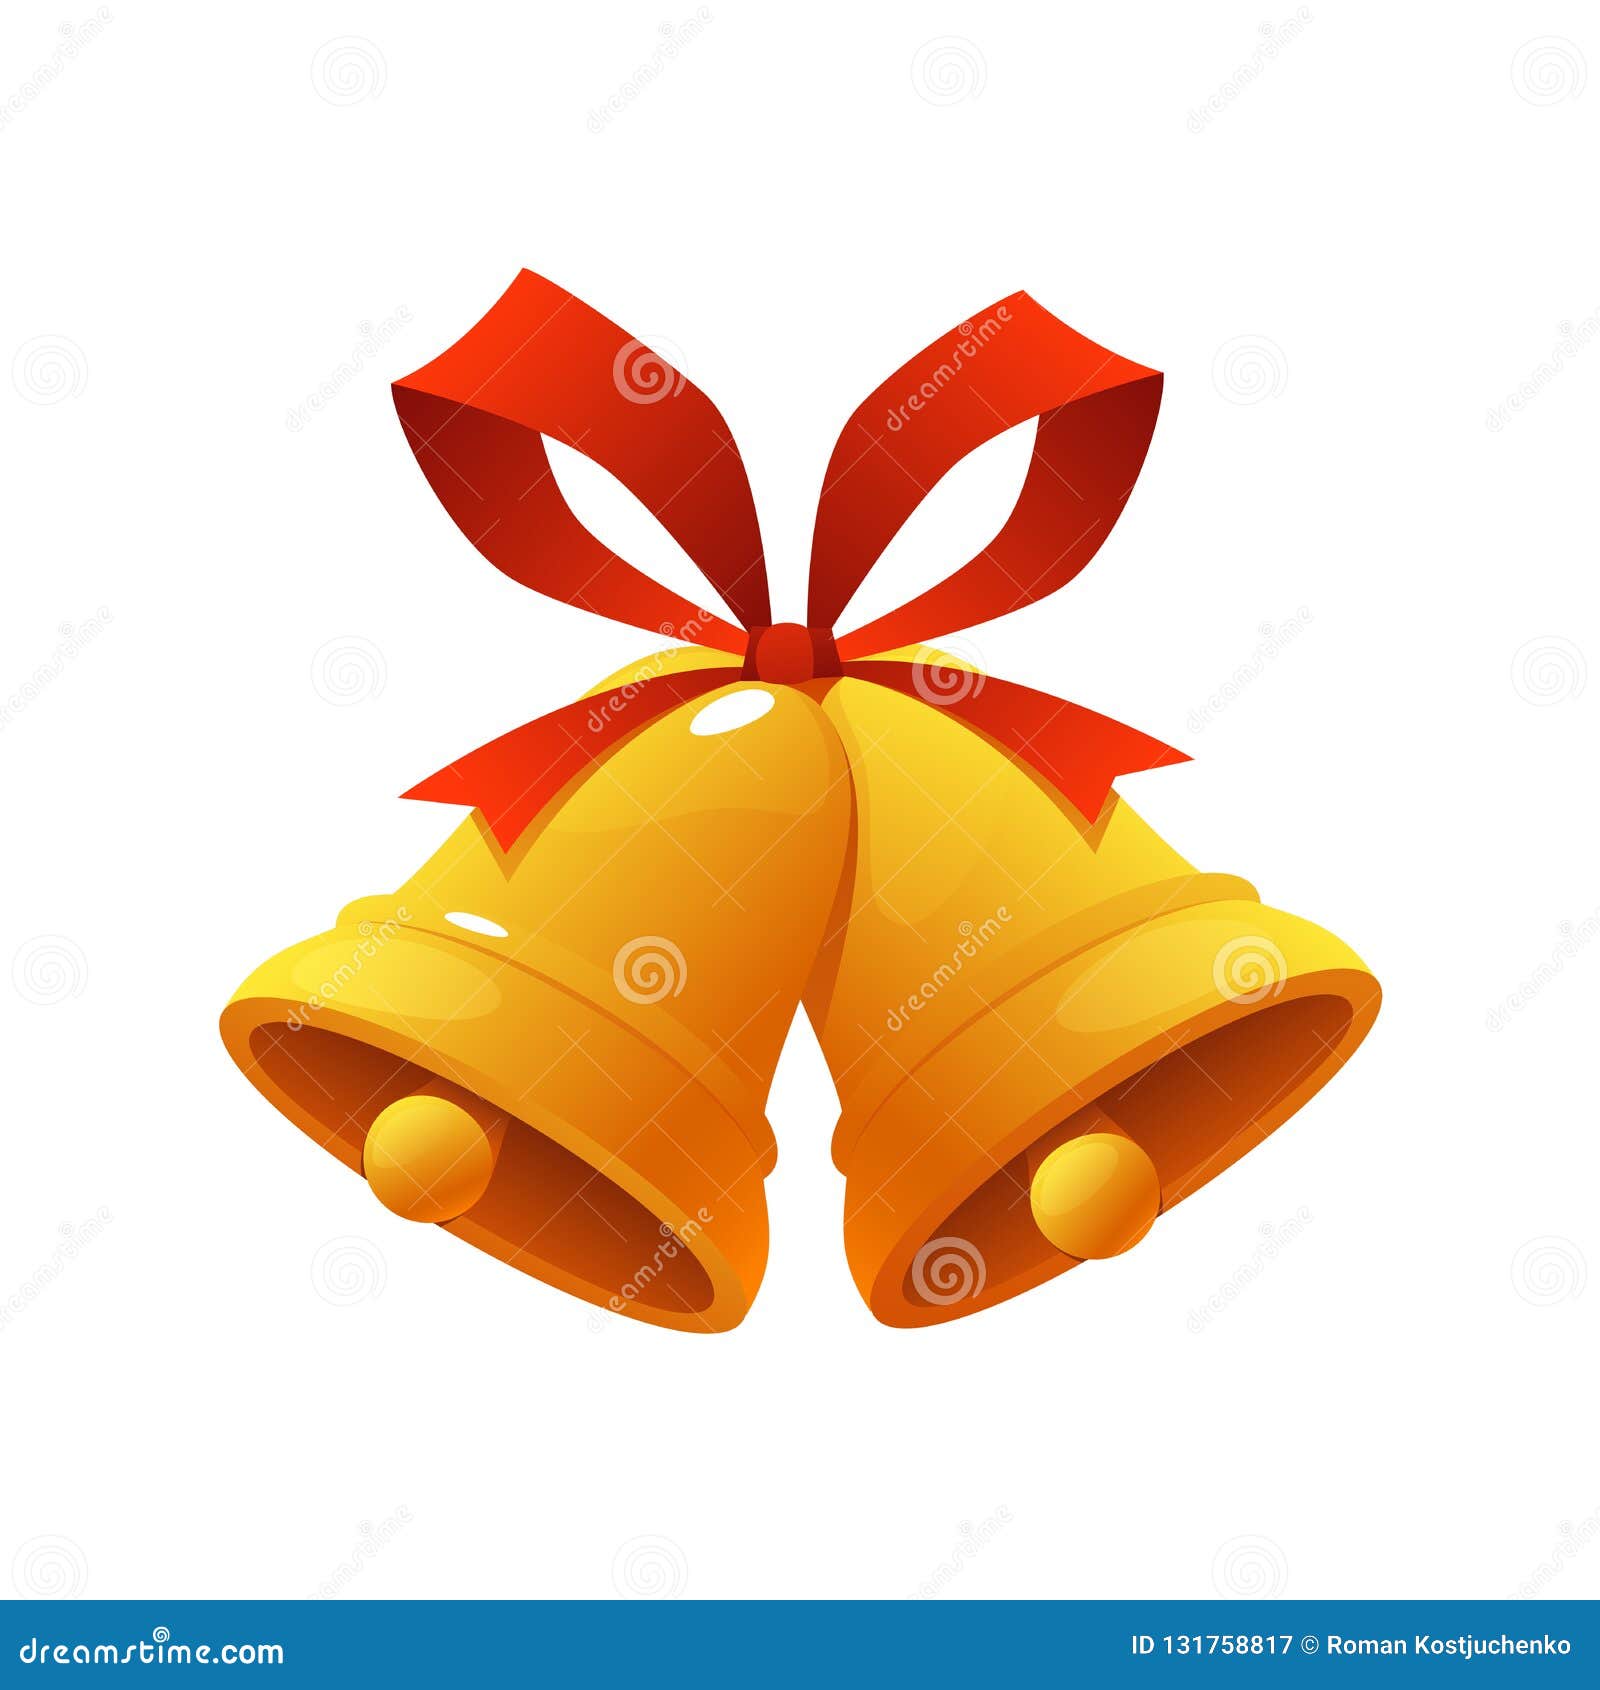 Jingle bells sign icon Royalty Free Vector Image